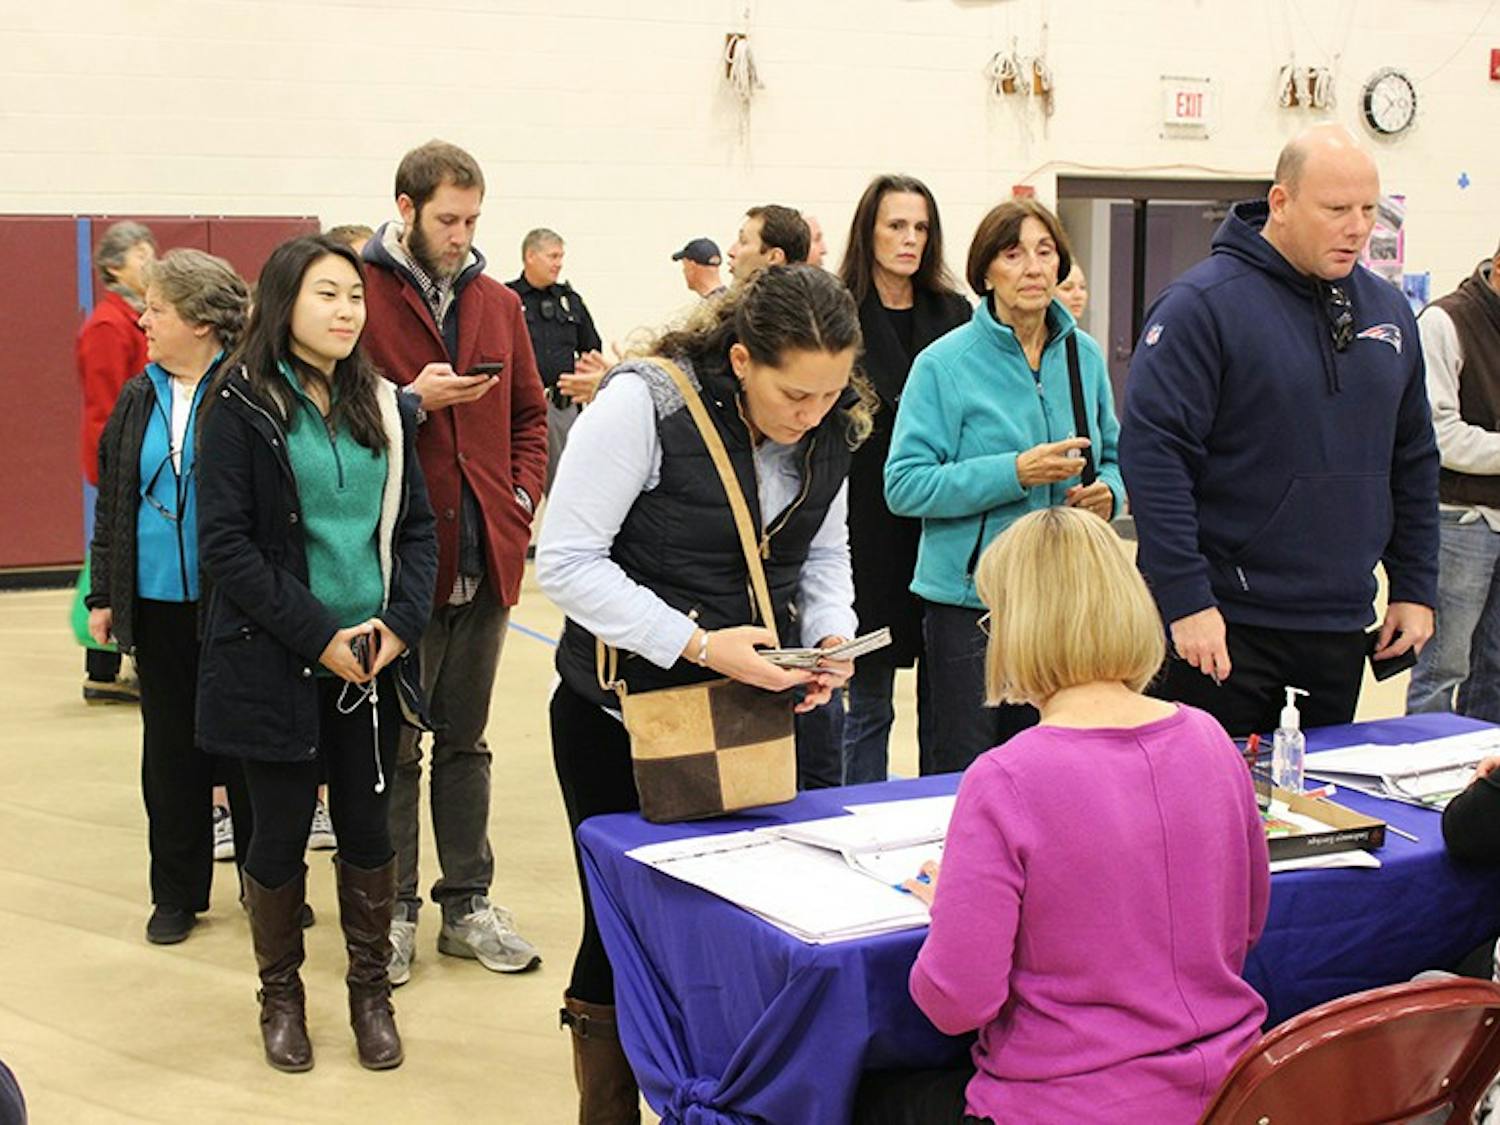 Voters line up to register or sign in before casting their ballots at Hanover High School on Election Day.&nbsp;